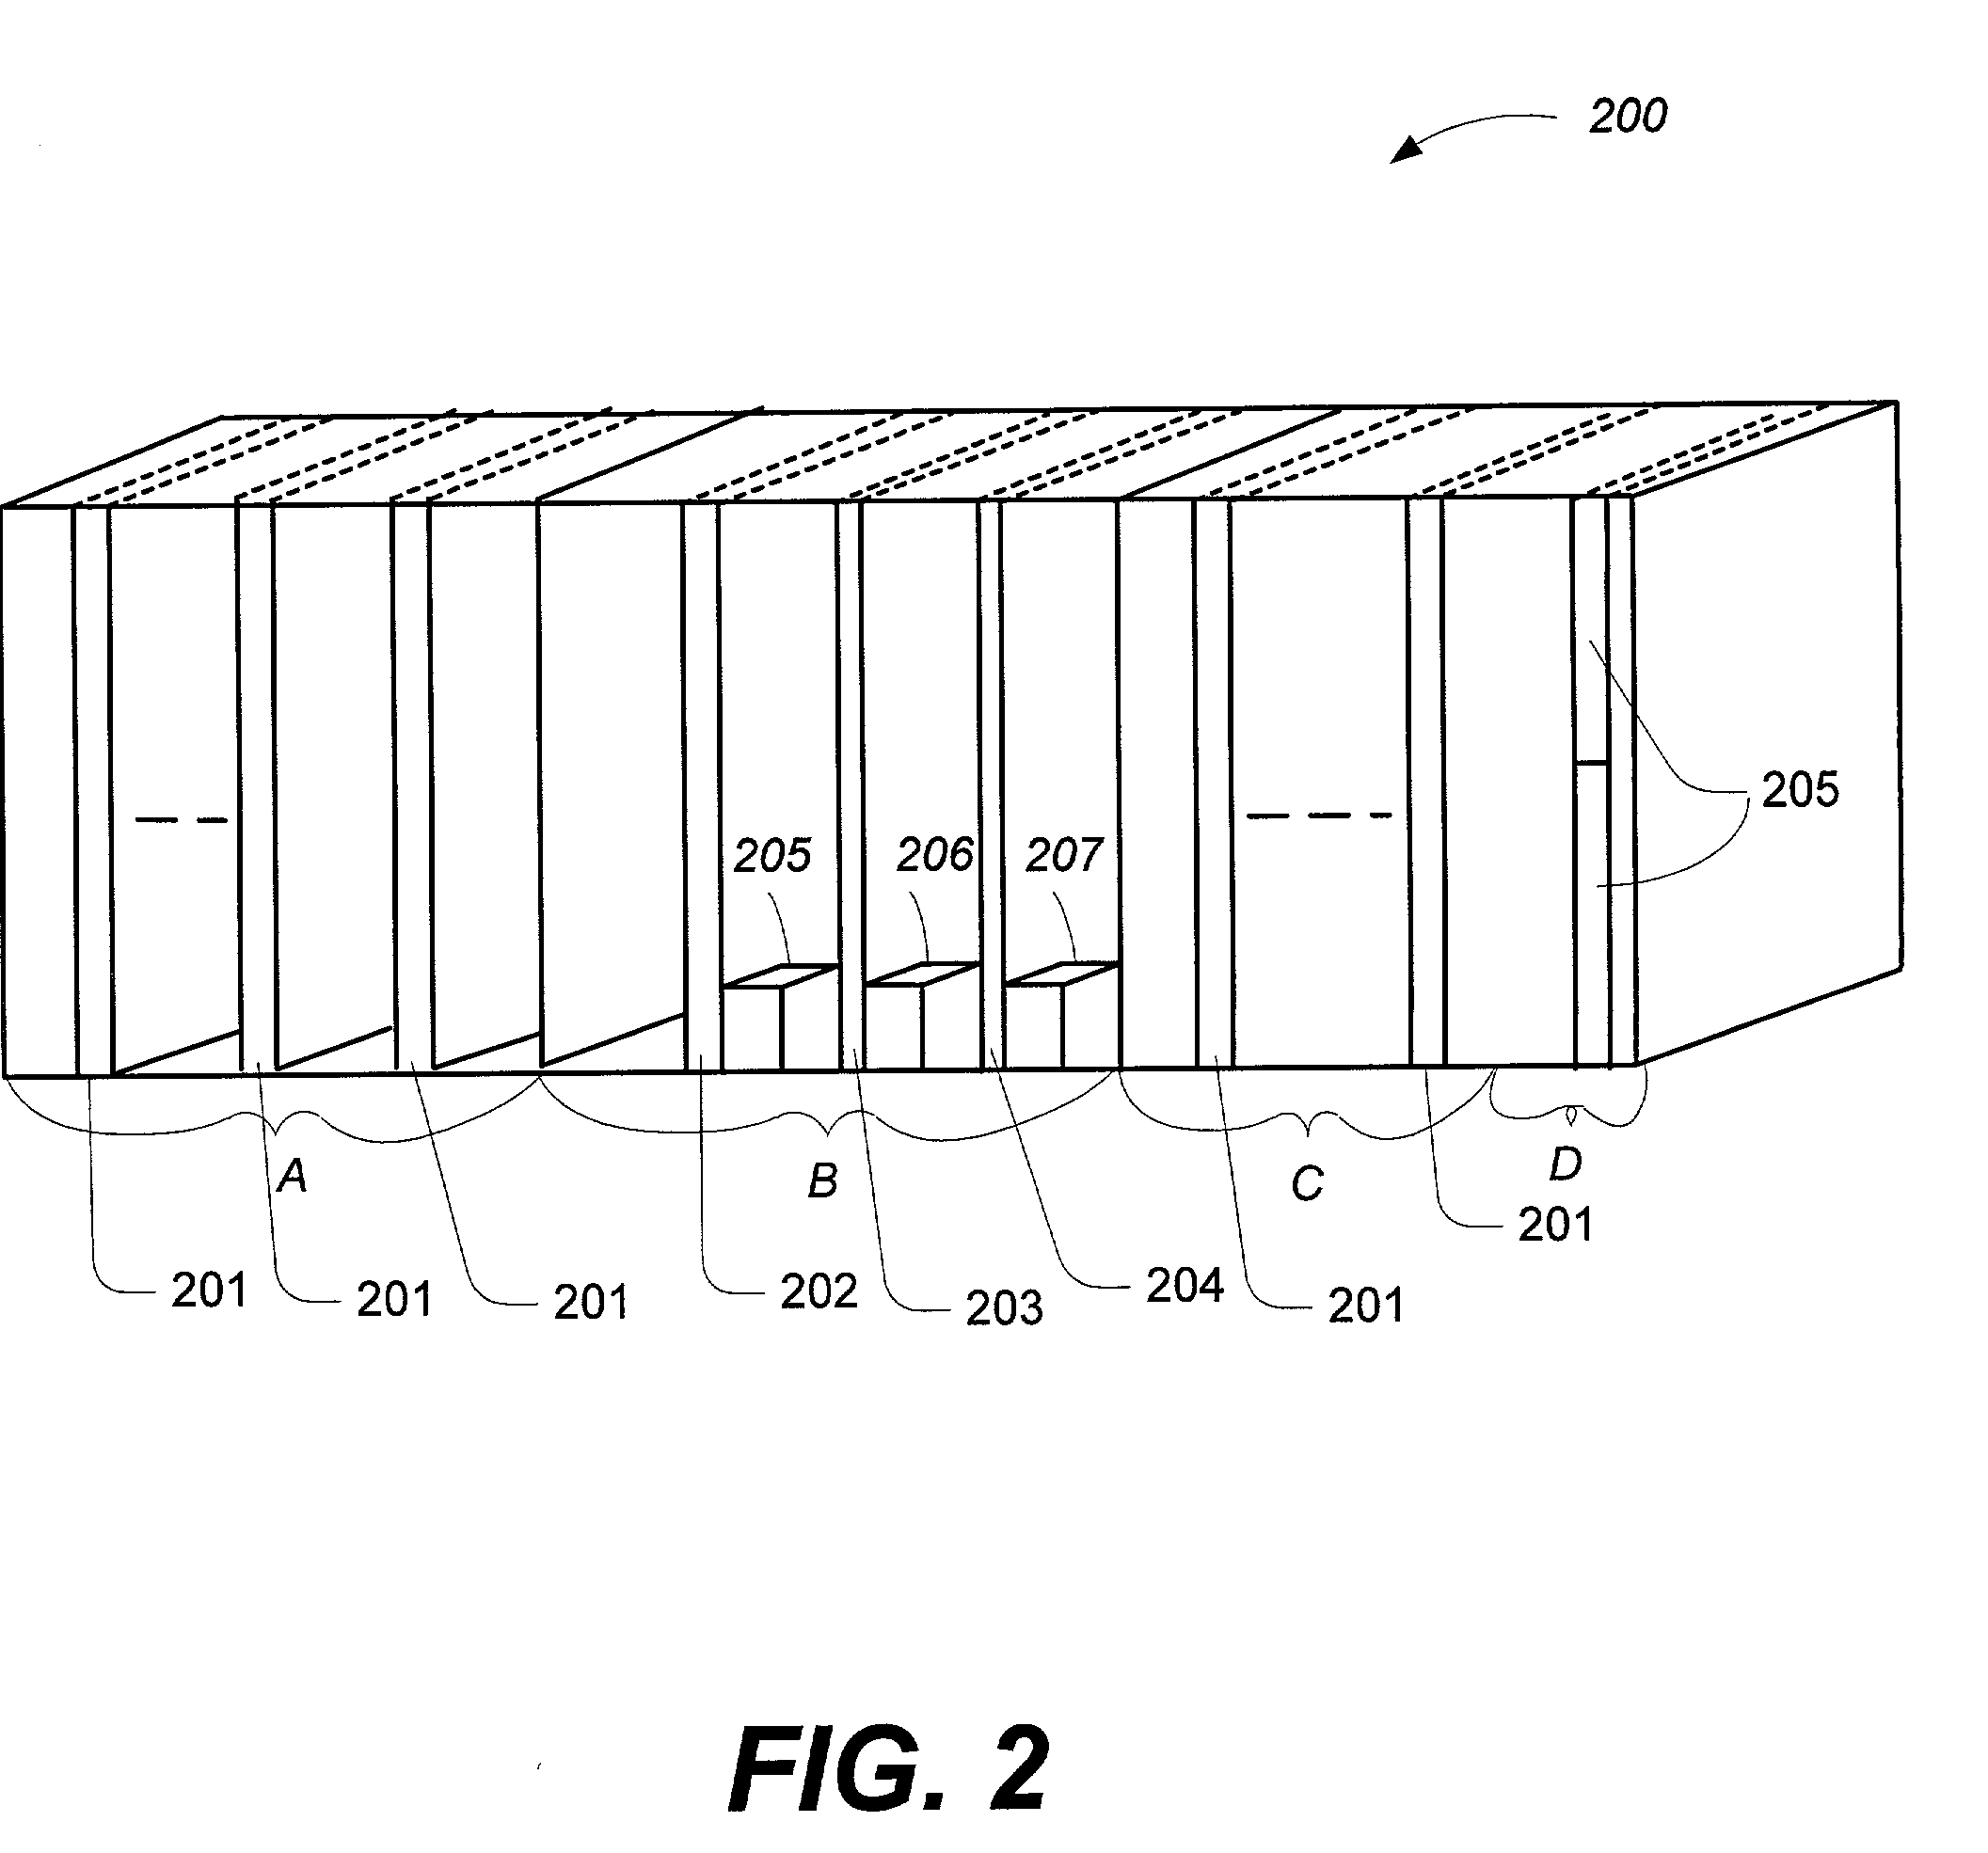 System and method for expansion of computer network switching system without disruption thereof